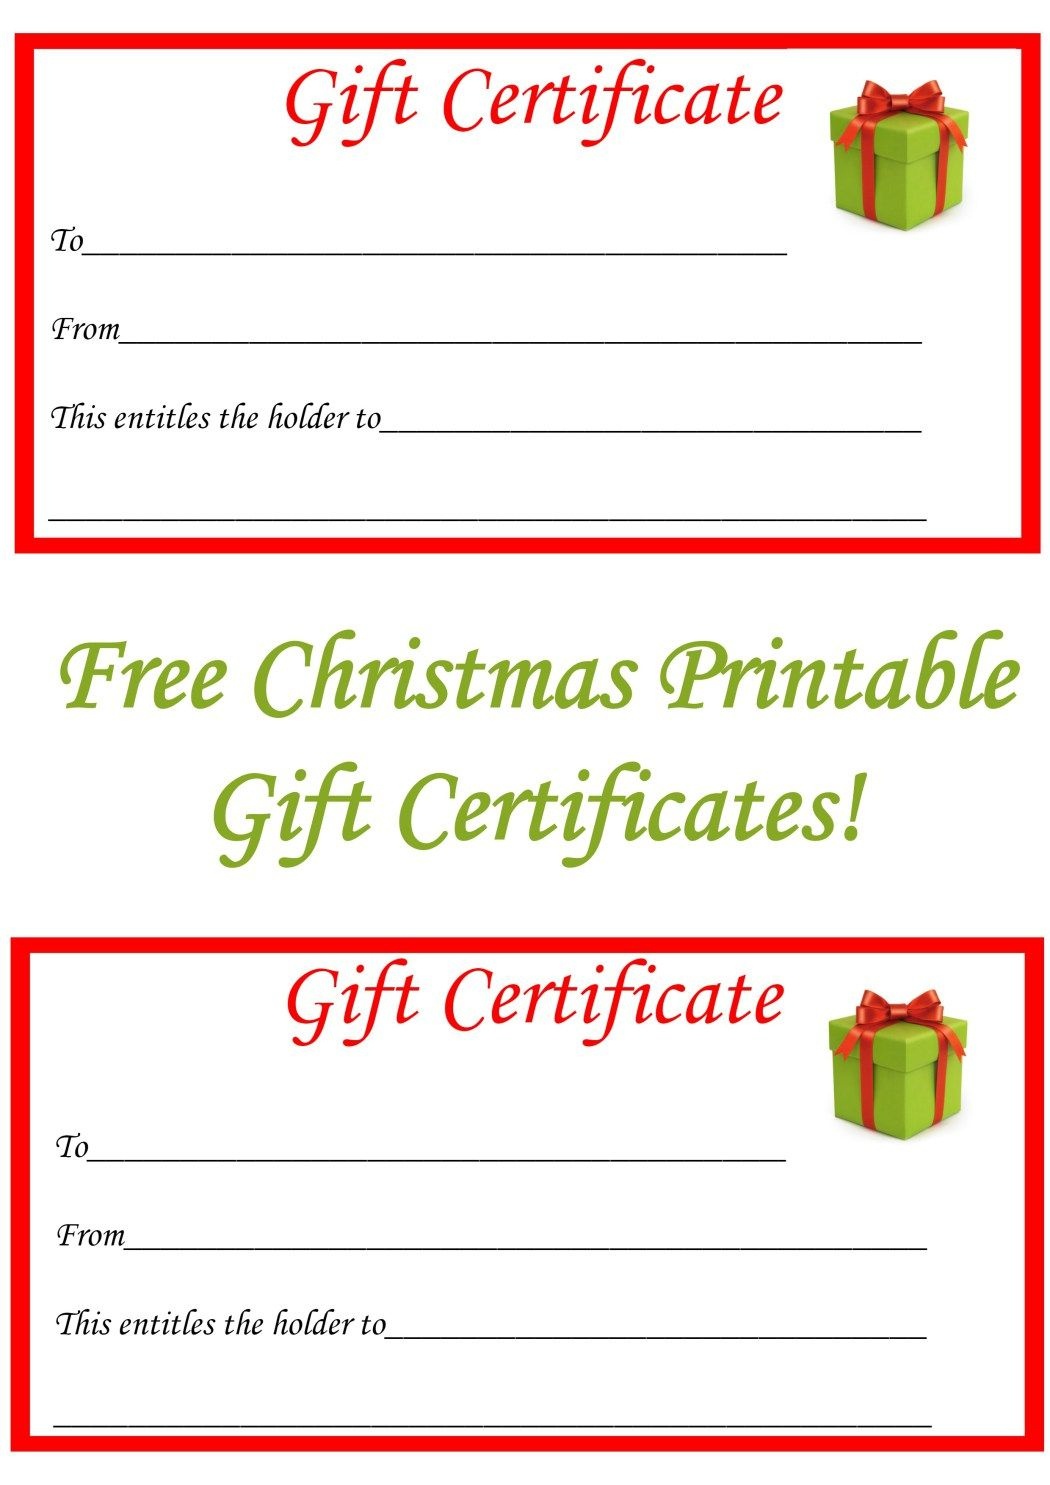 Free Christmas Printable Gift Certificates | Gift Ideas | Christmas - Free Printable Gift Certificate Templates For Massage